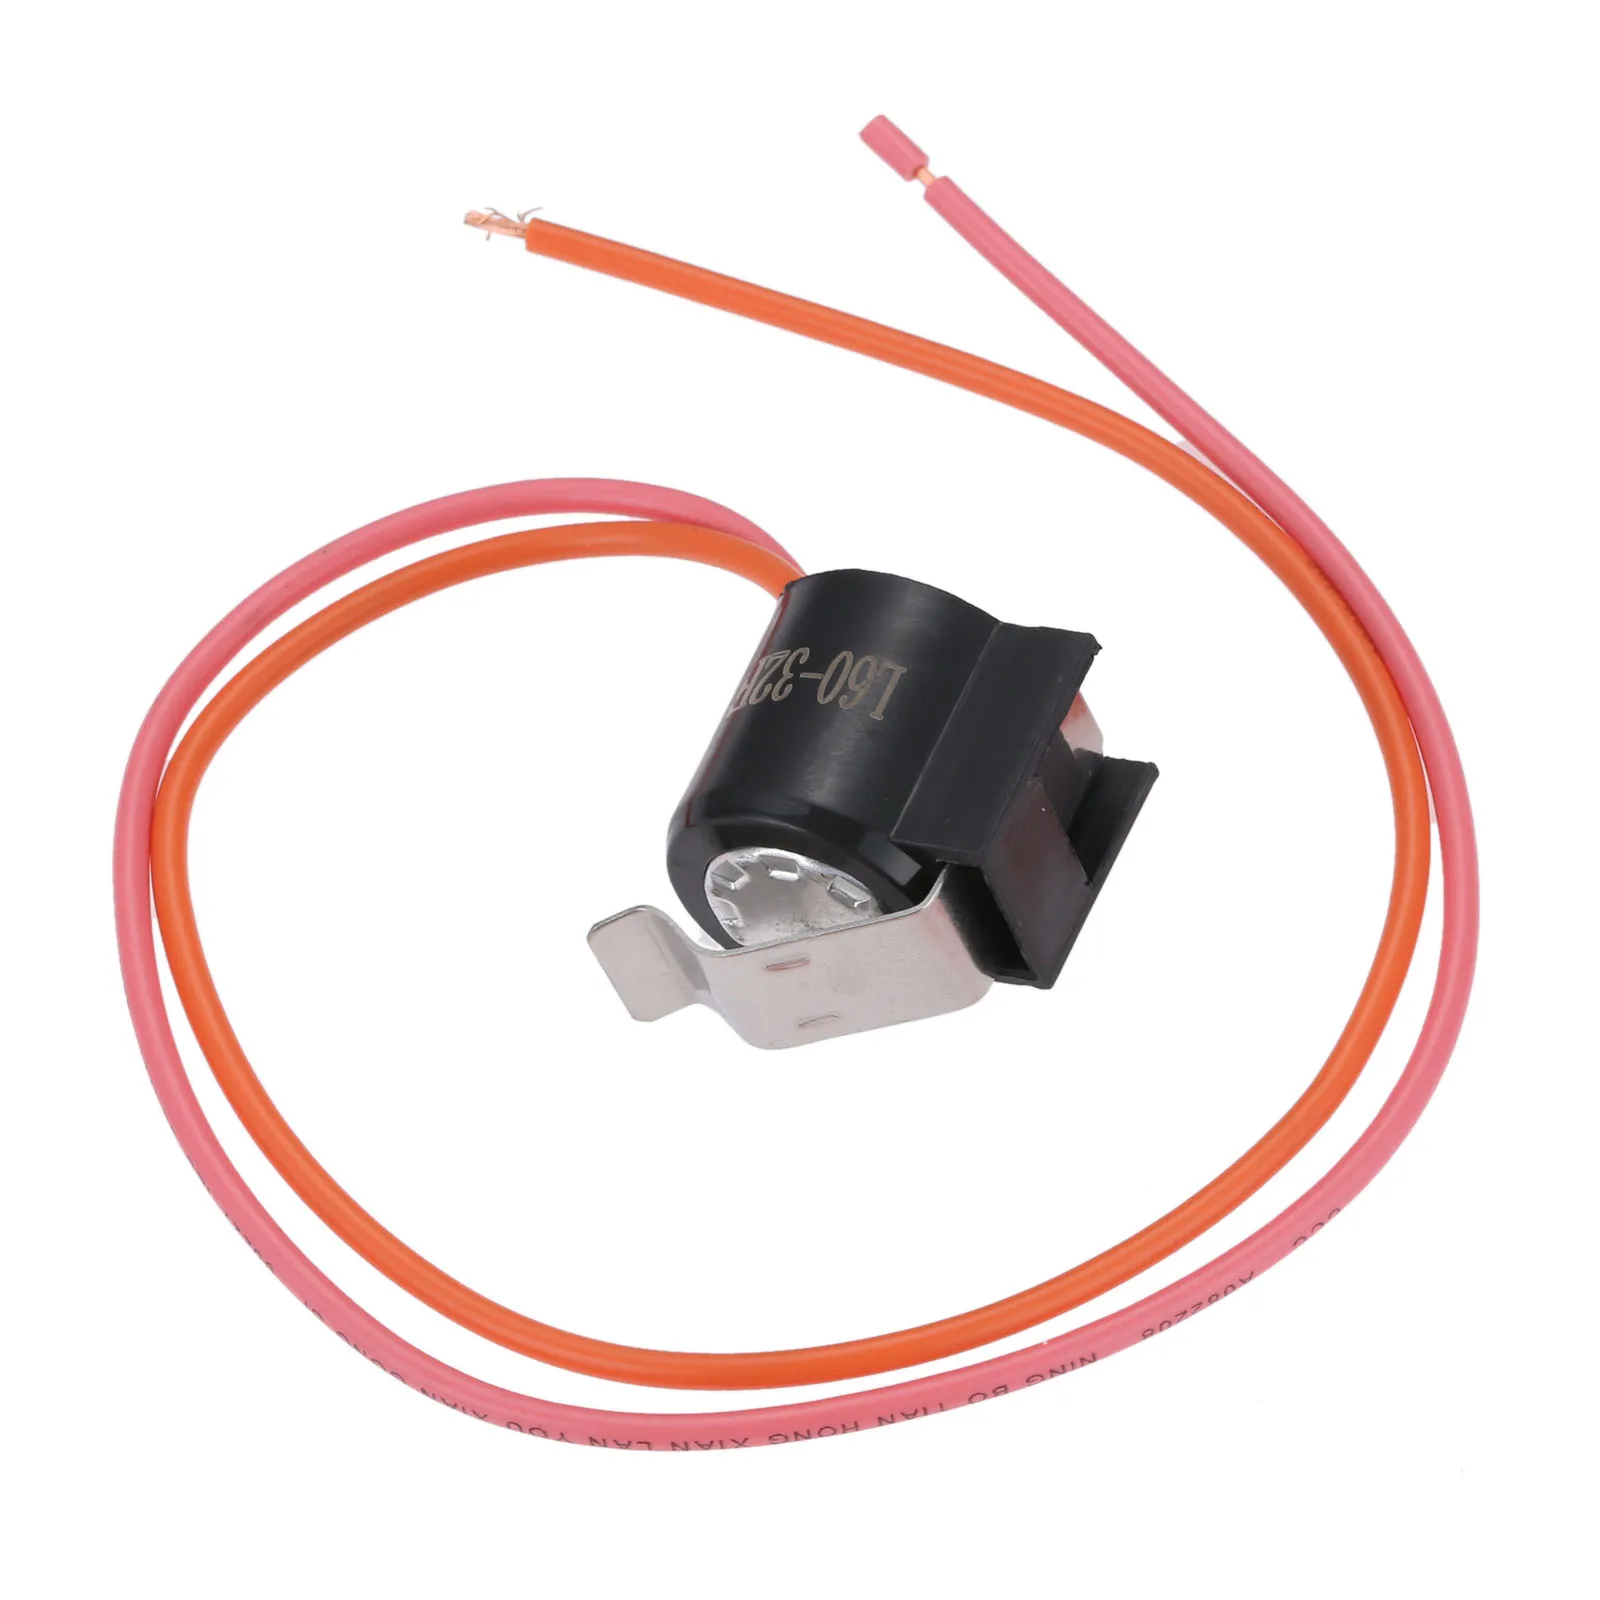 

WR50X122 Defrost Thermostat for General Electric Hotpoint RCA Sears Kenmore WR50X10014 2387 AH303471 EA303471 PS303471